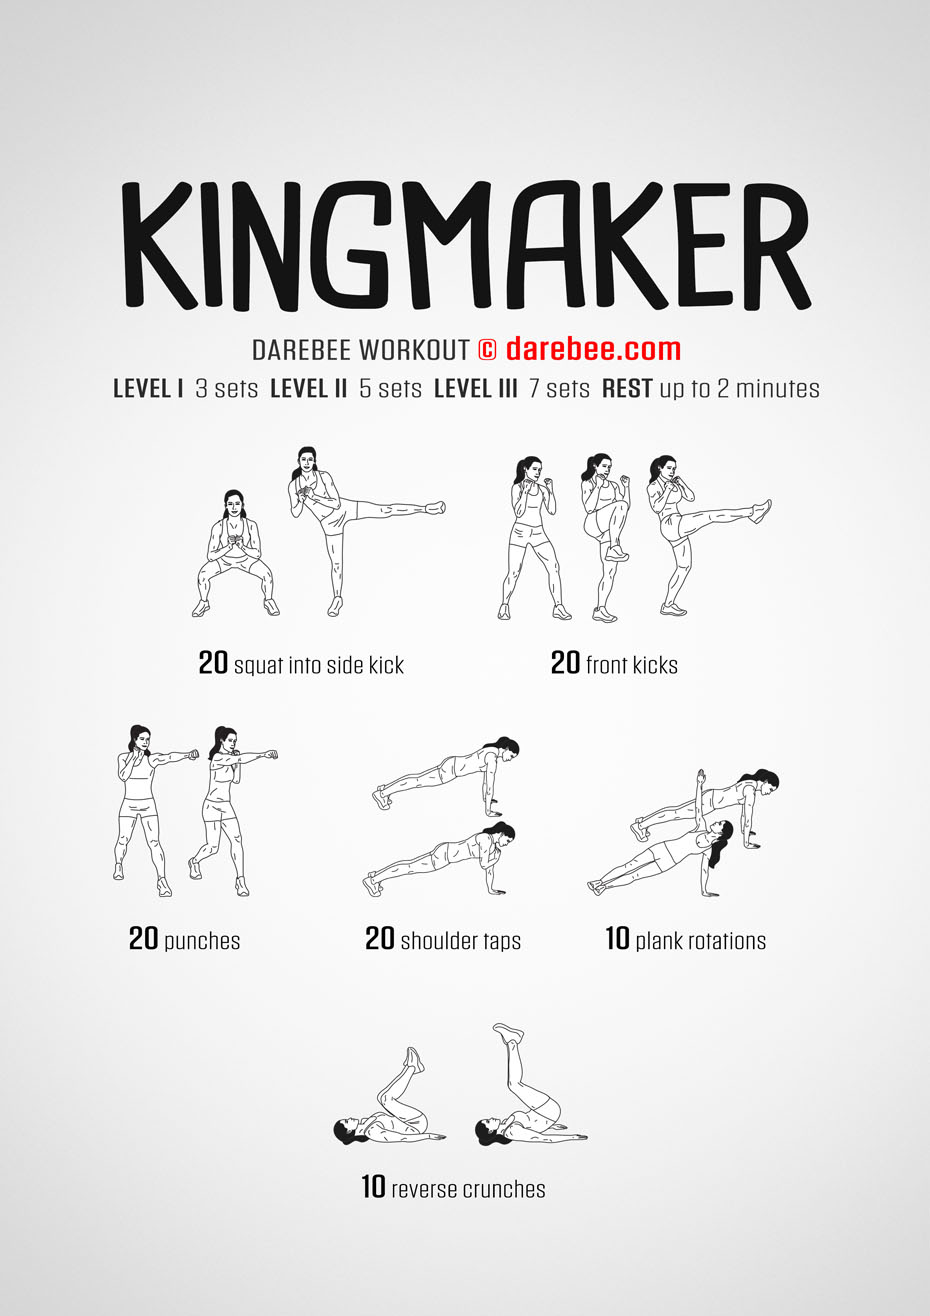 Kingmaker is a Darebee, home-fitness, combat moves based workout